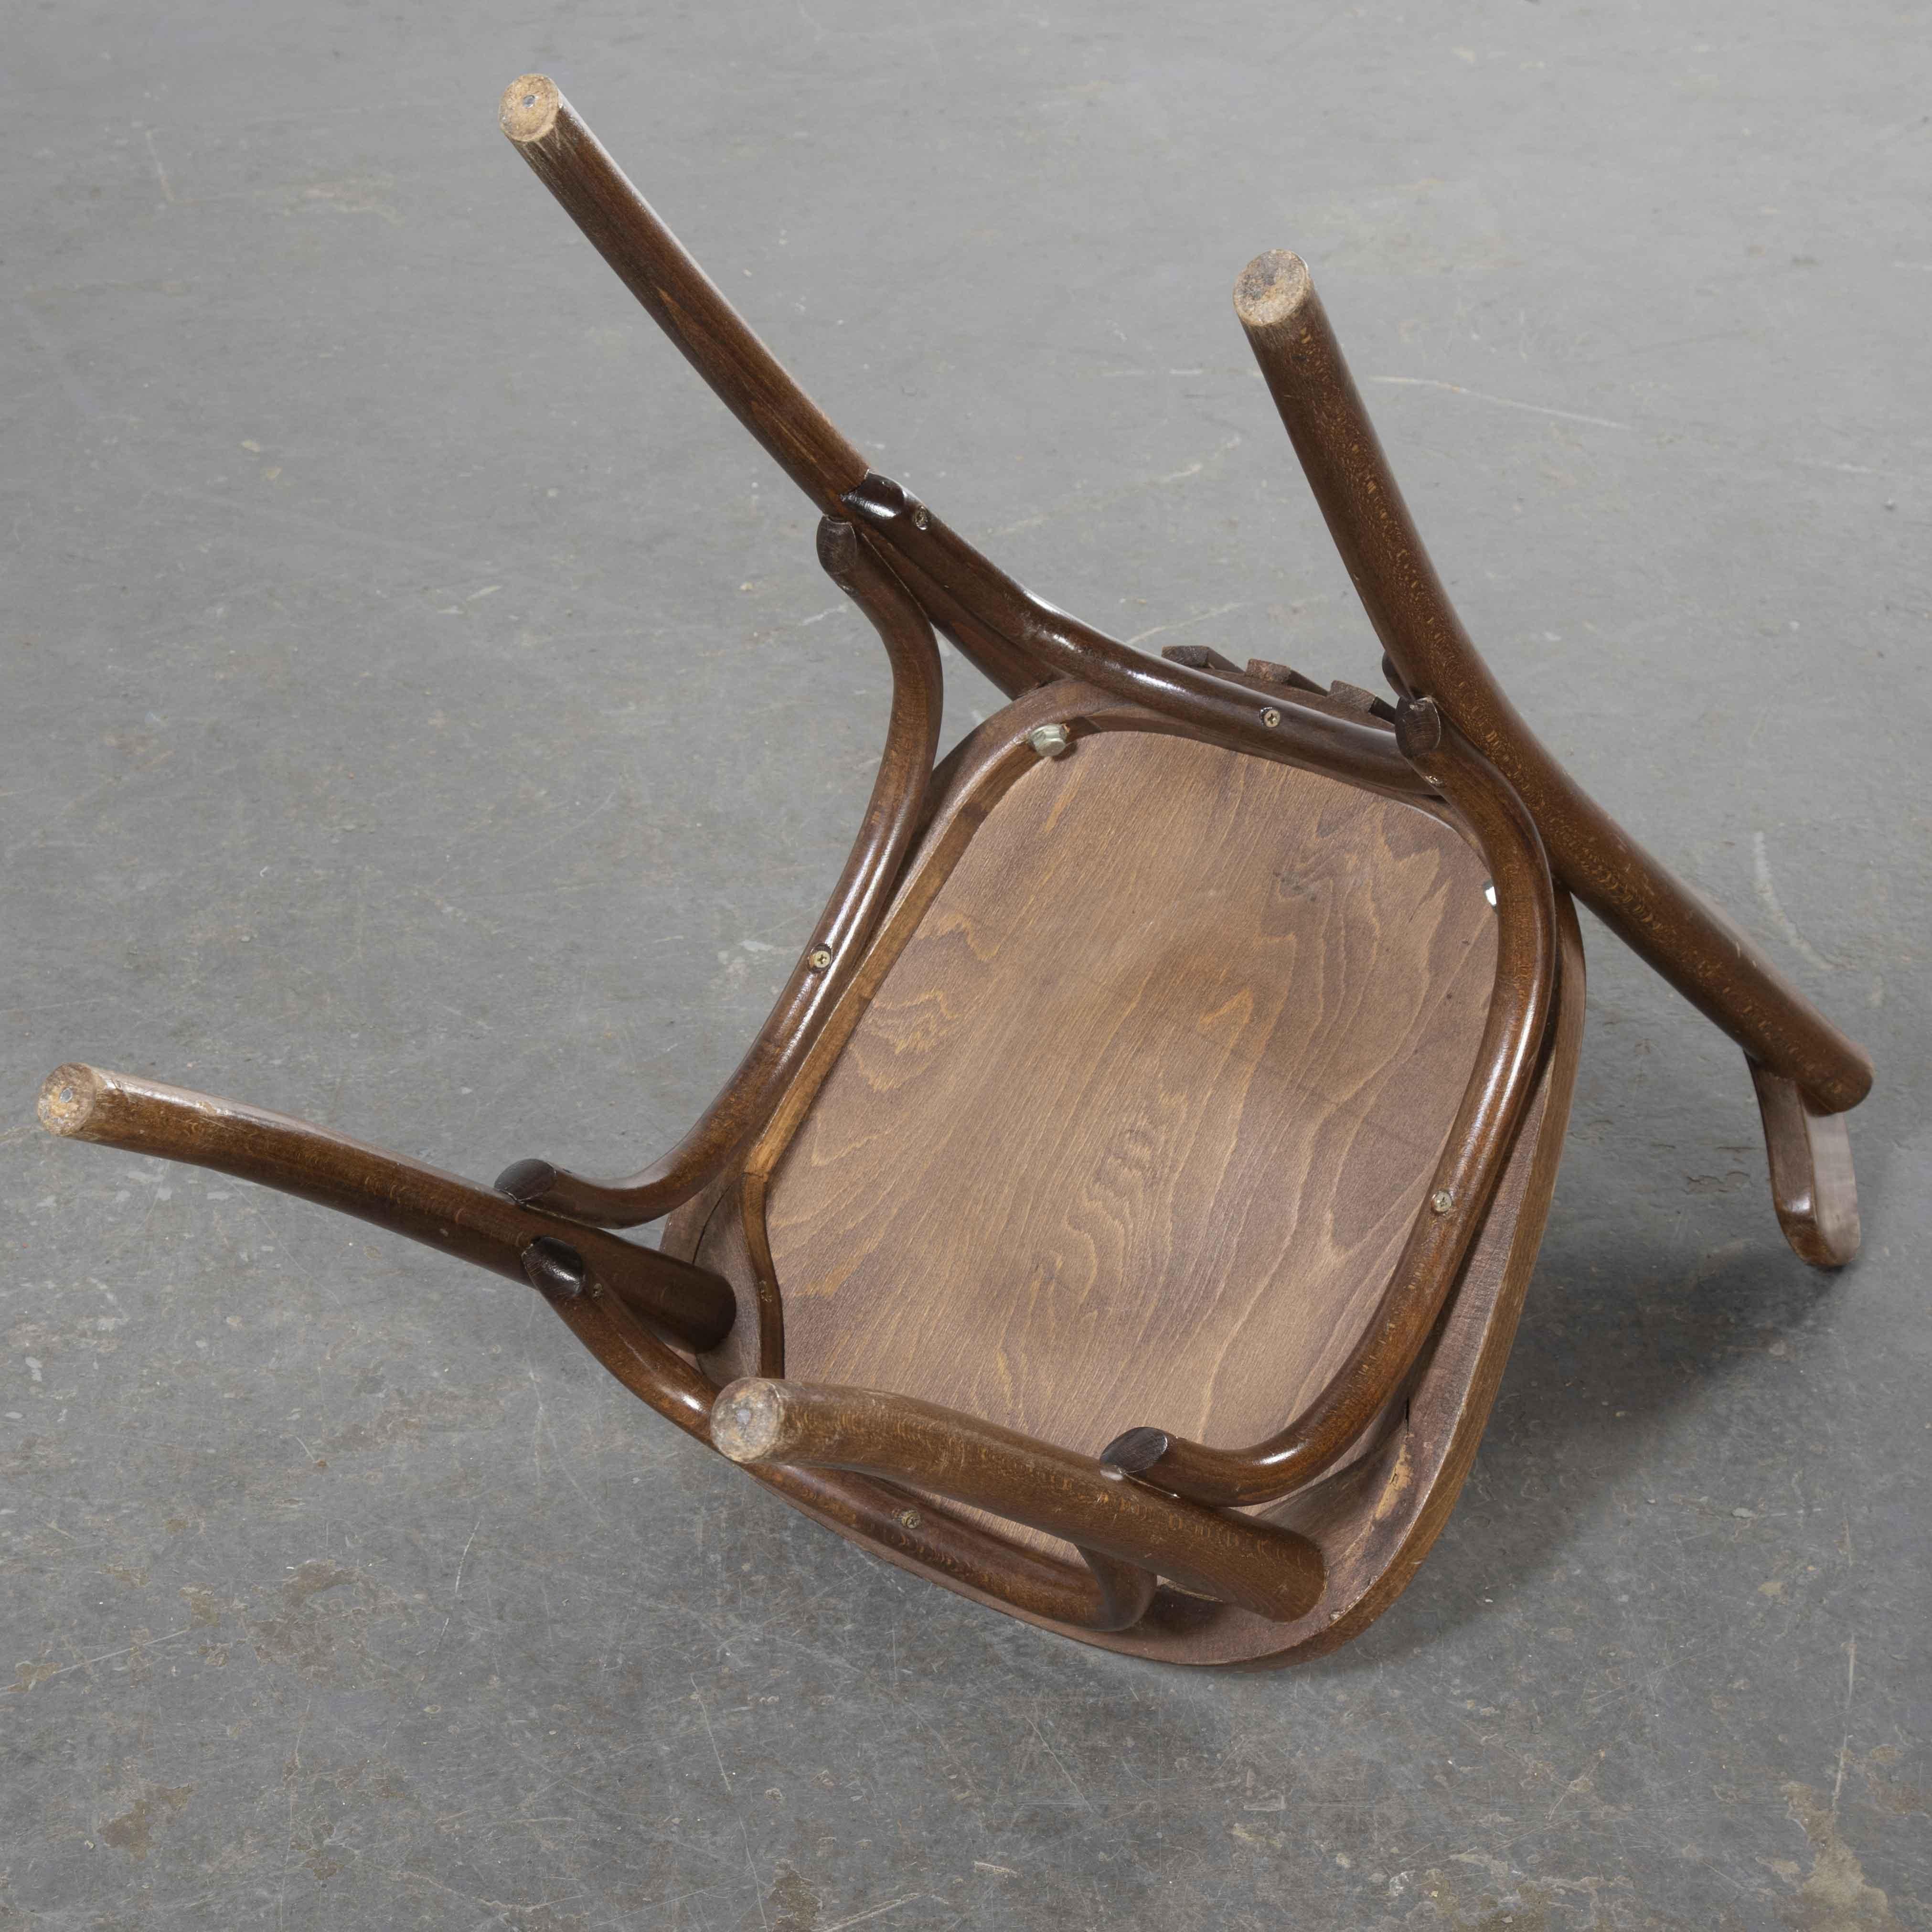 1970’s French dark oak bentwood dining chairs – various quantities available

1970’s French dark oak bentwood dining chairs – various quantities available. We are not sure of the maker but suspect they are by the French manufacturer Fischel. Great